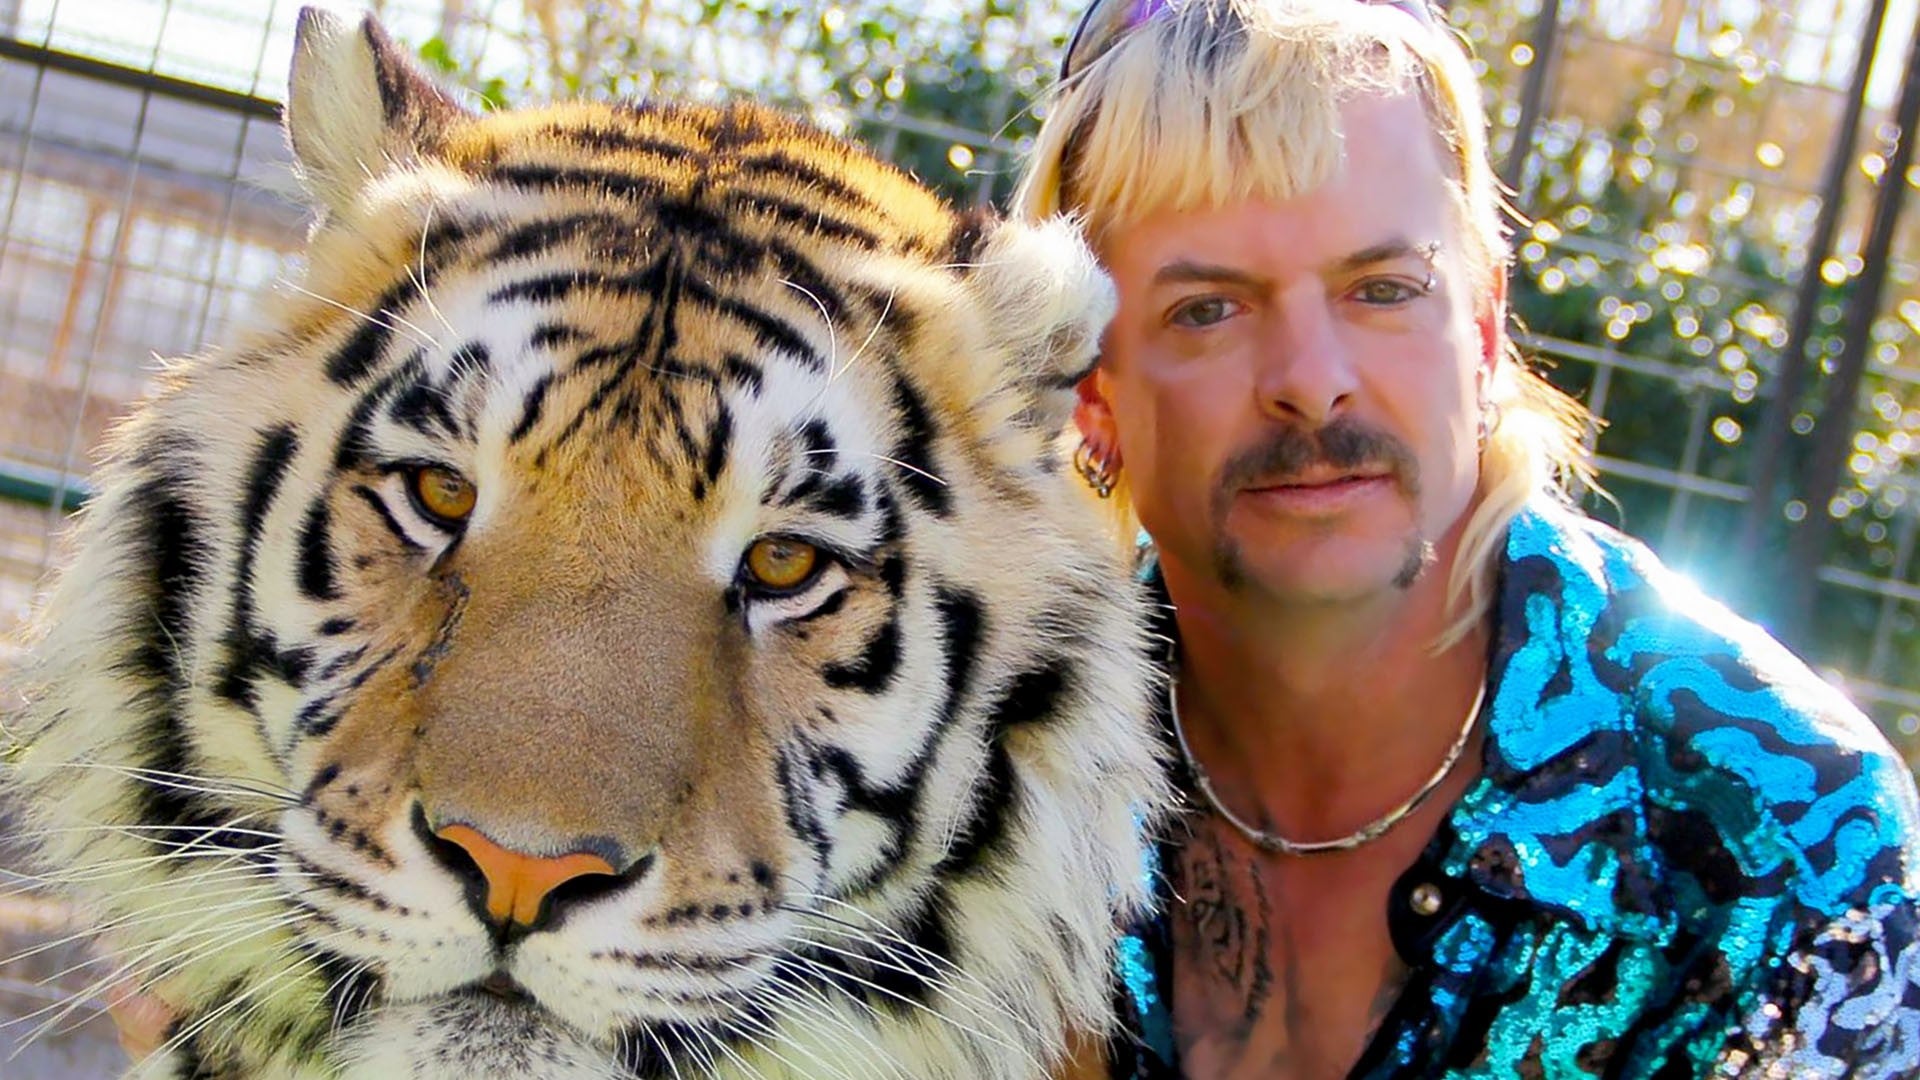 Tiger King Star Joe Exotic Files 94m Lawsuit From Federal Prison